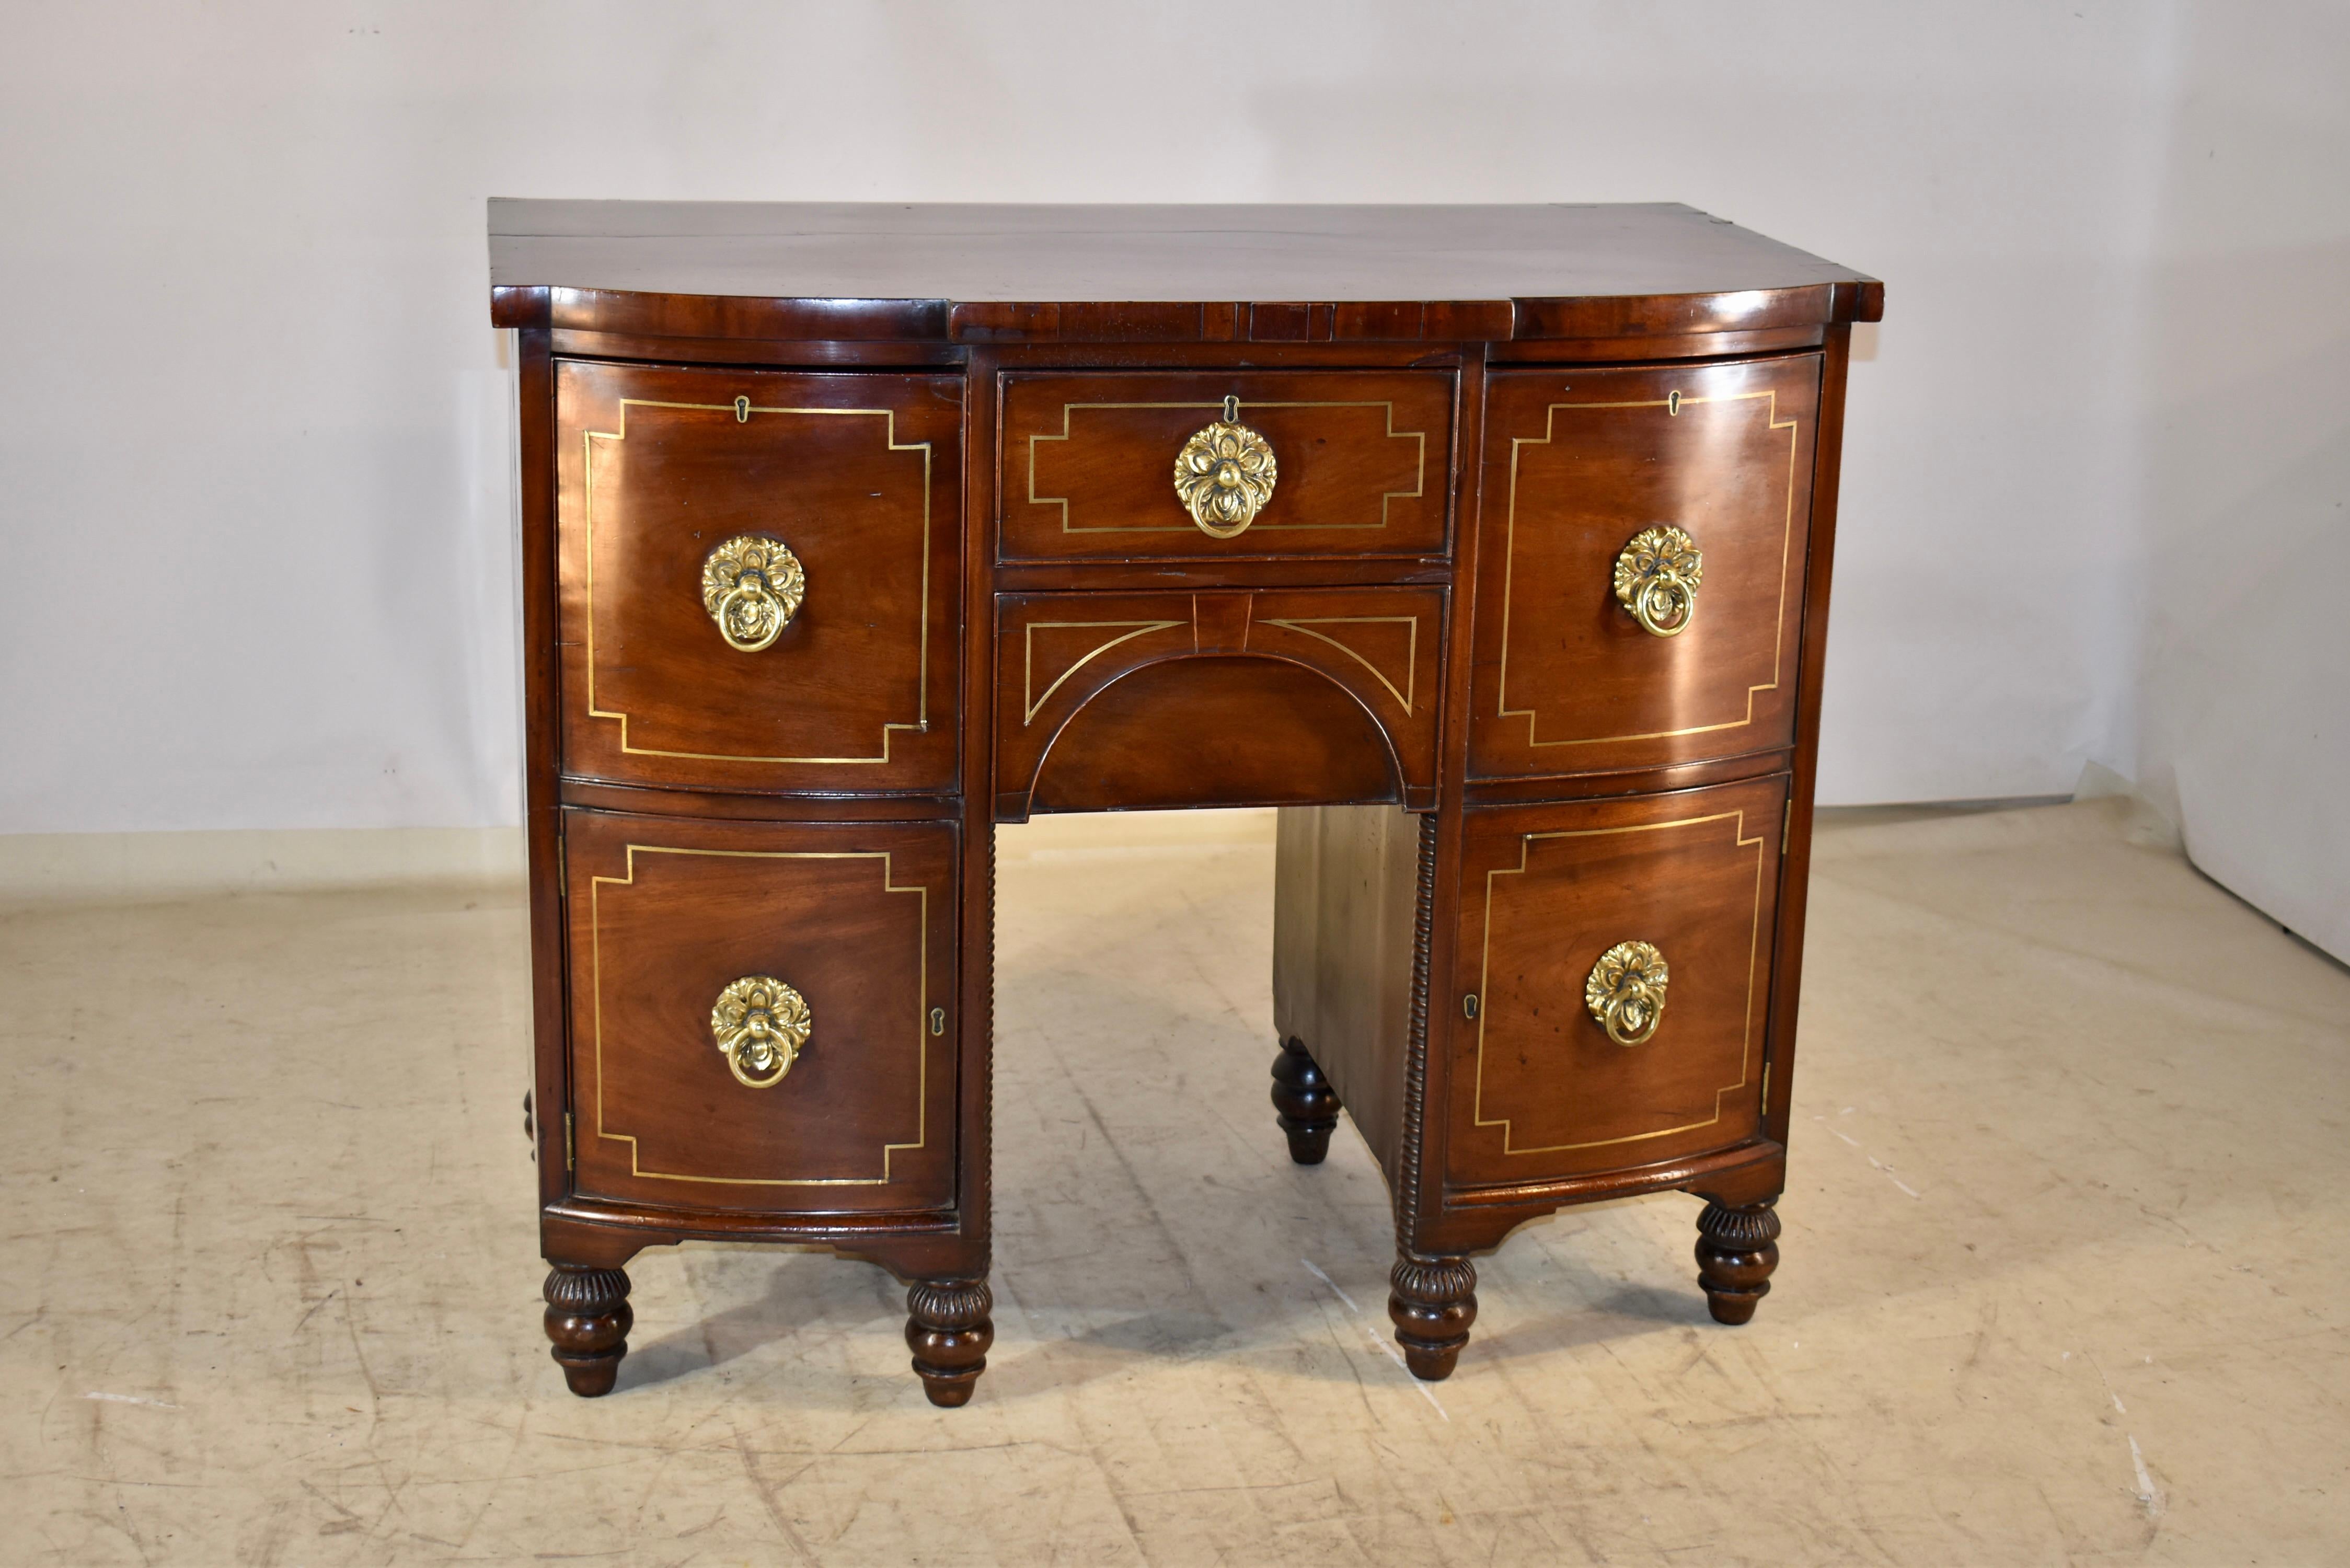 Early 19th century mahogany brand board, or small sideboard from England.  This piece has a banded mahogany edge with satinwood inlay around the top.  The top is shaped to compliment the curves of the piece below.  It has blocked out edges and a